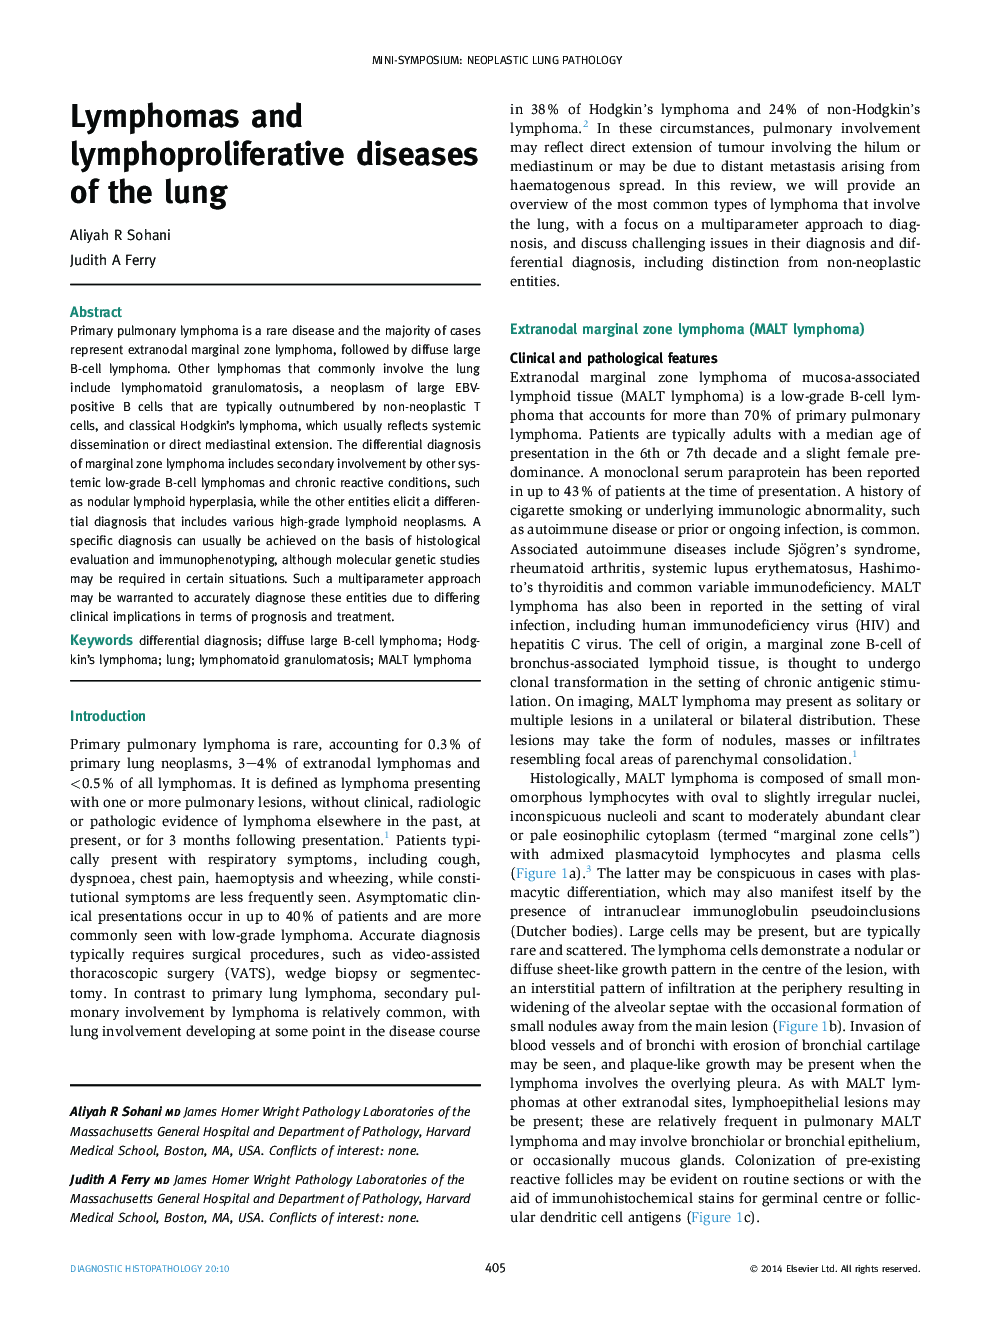 Lymphomas and lymphoproliferative diseases of the lung